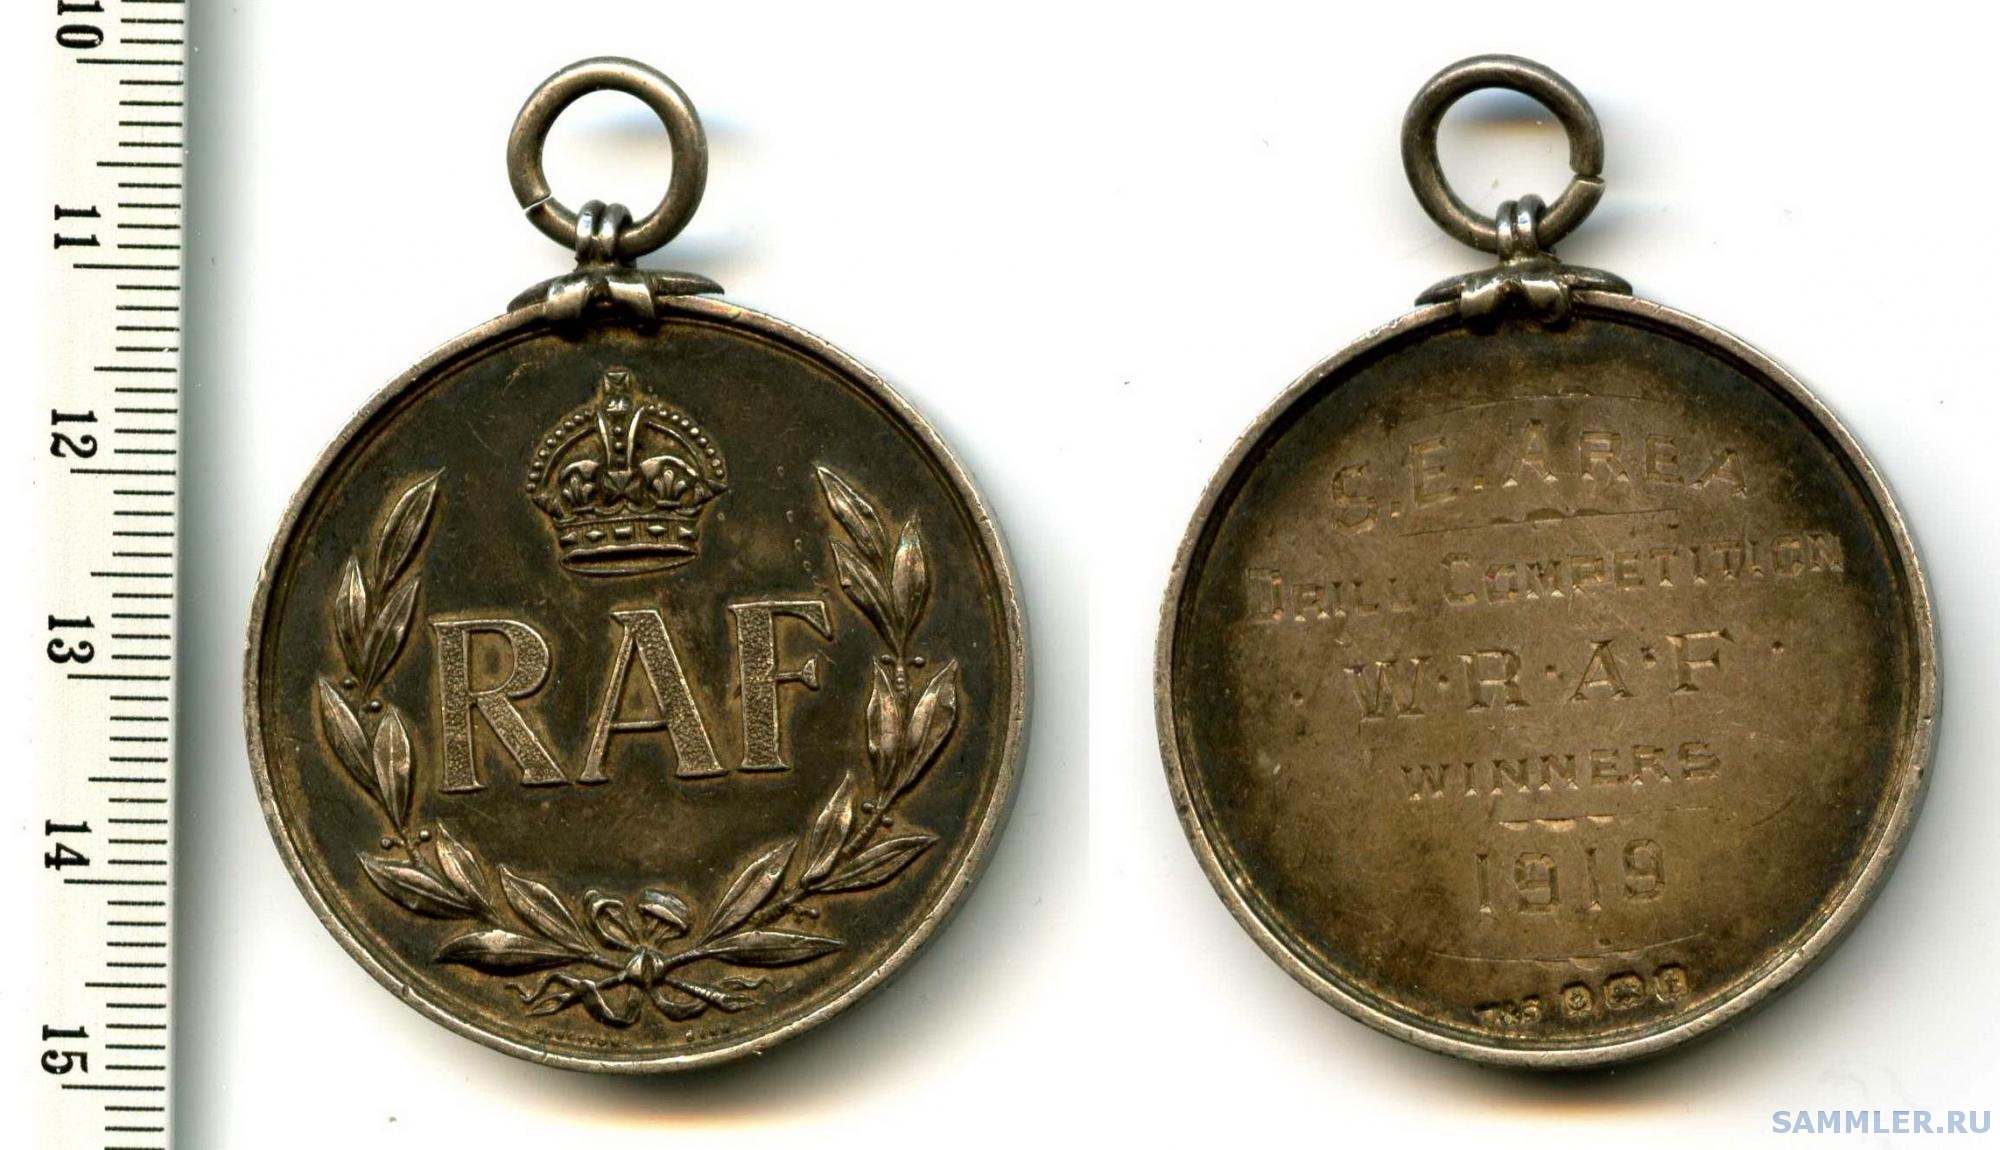 Women’s Royal Air Force 1919 Drill Competition Medal.jpg